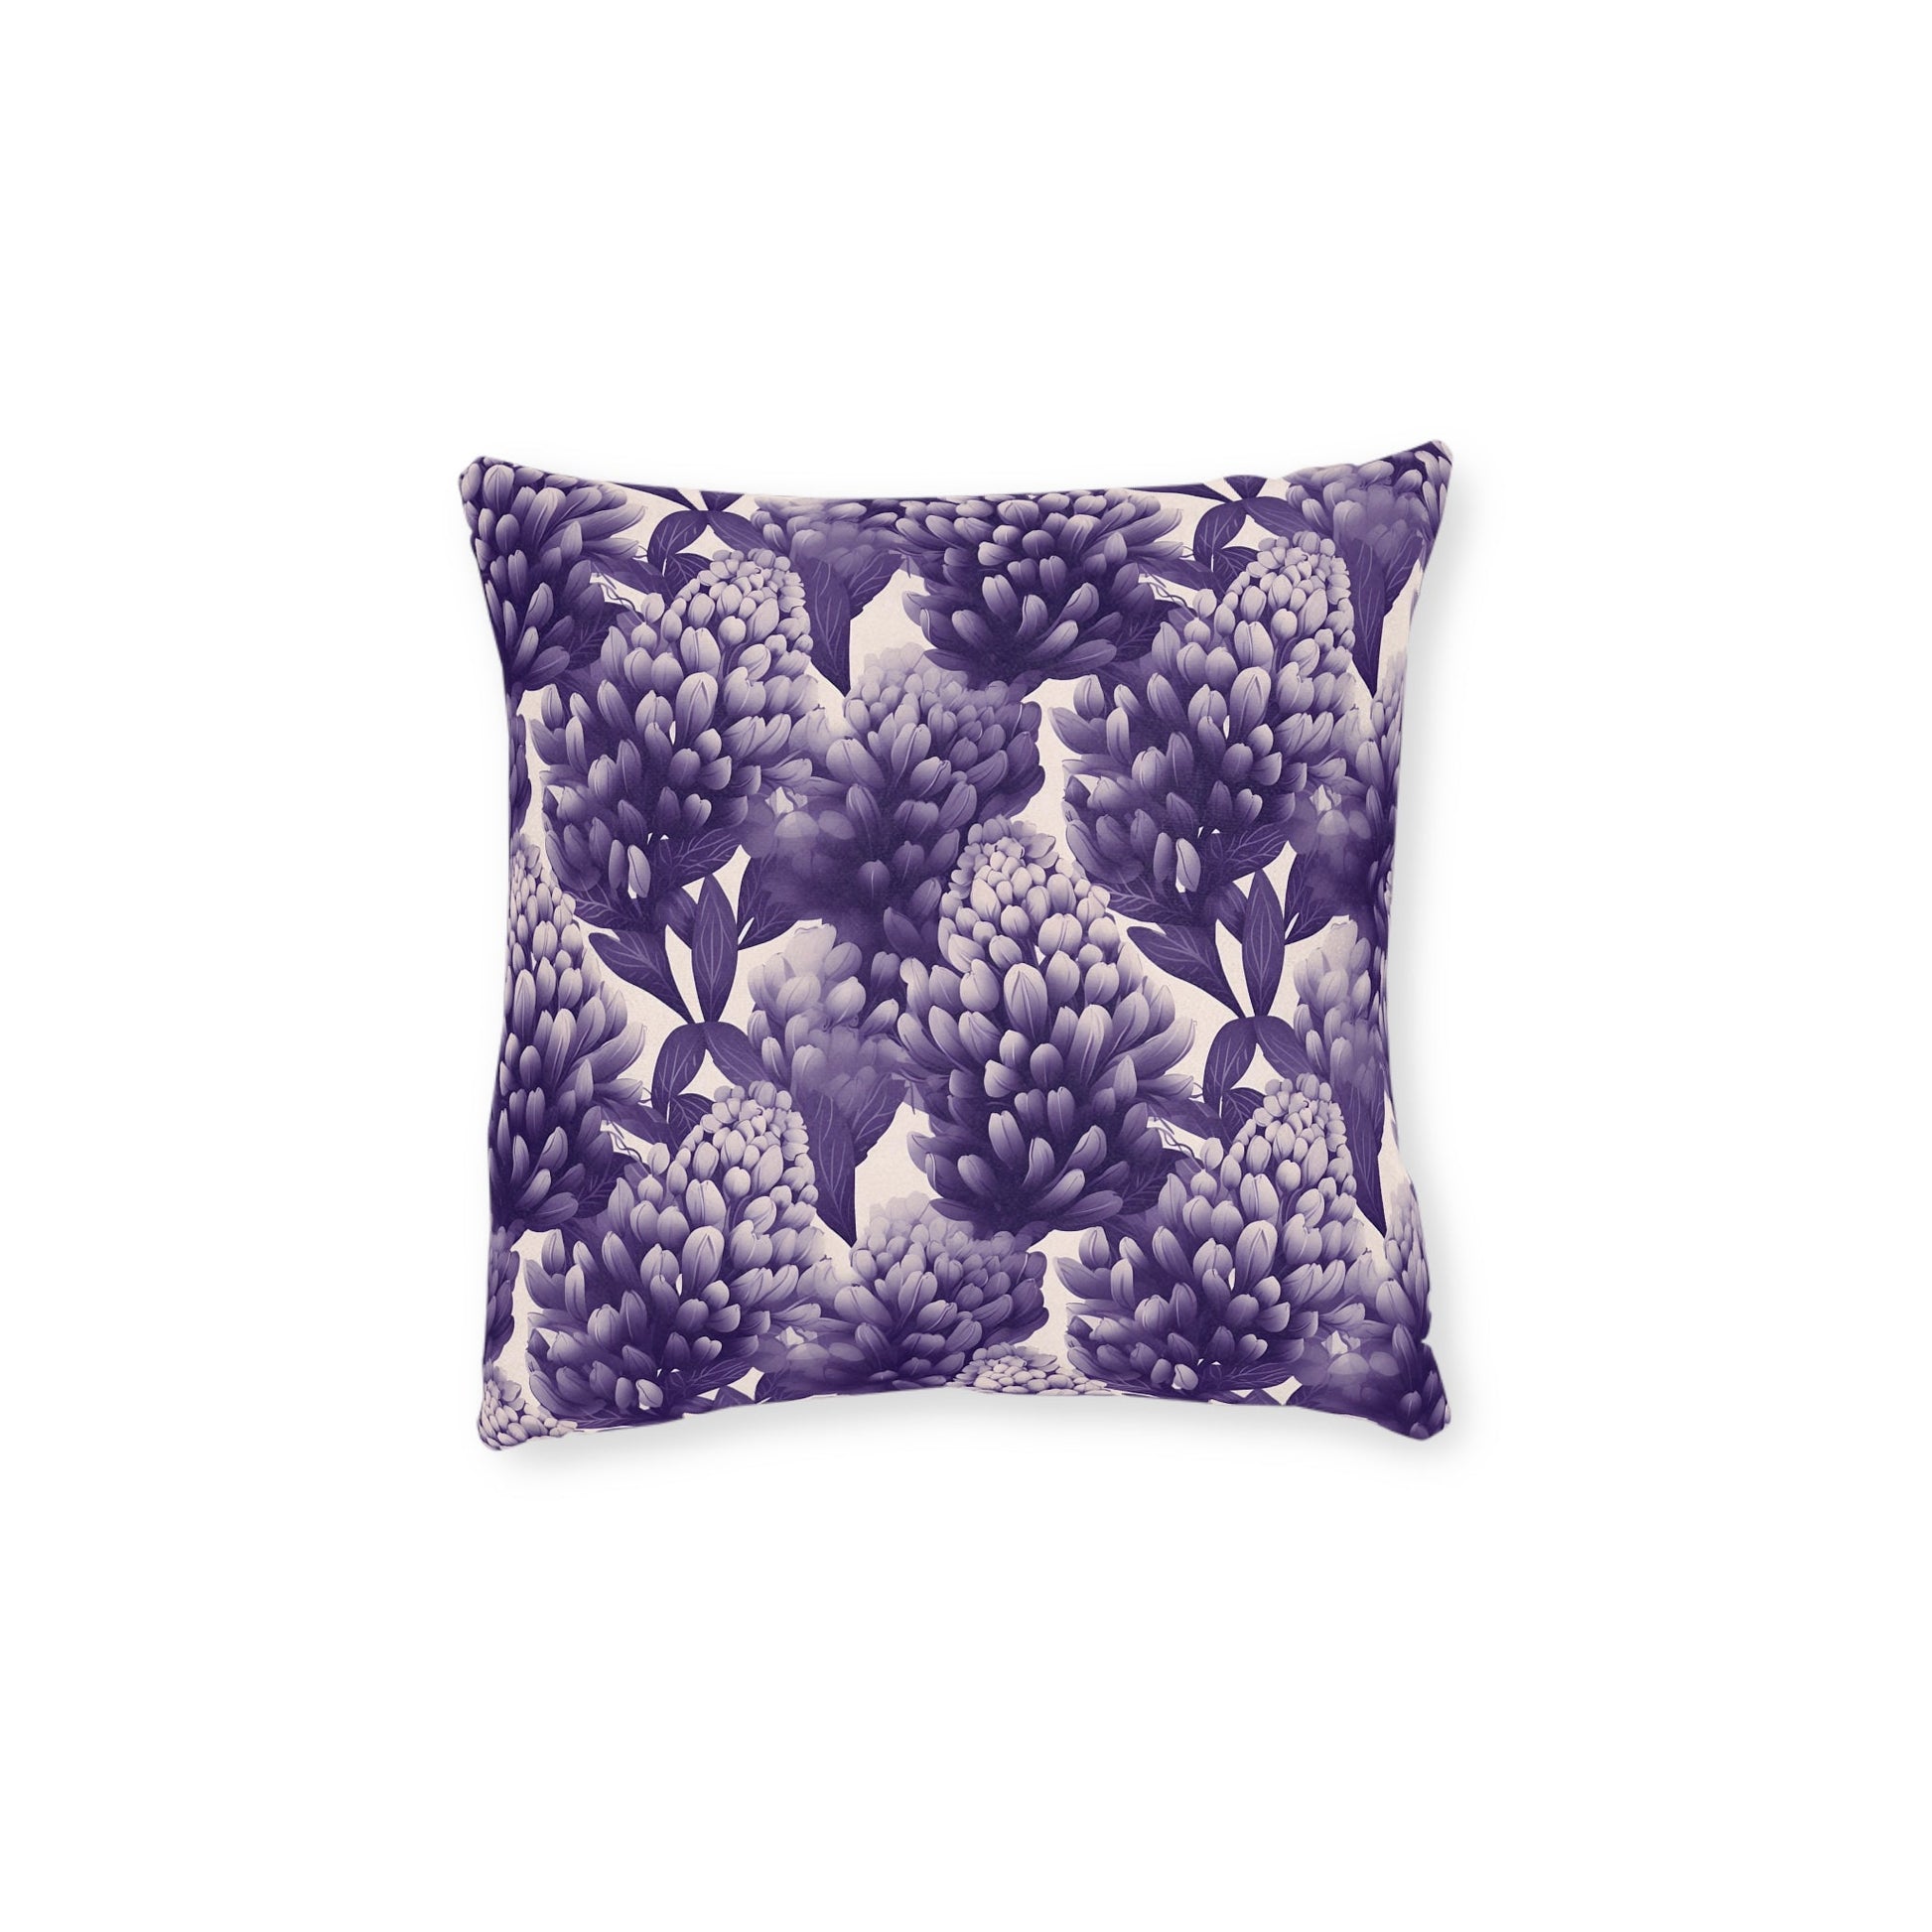 Gradient Grape Hyacinth - Purple and White Floral Sofa and Chair Cushion - Pattern Symphony